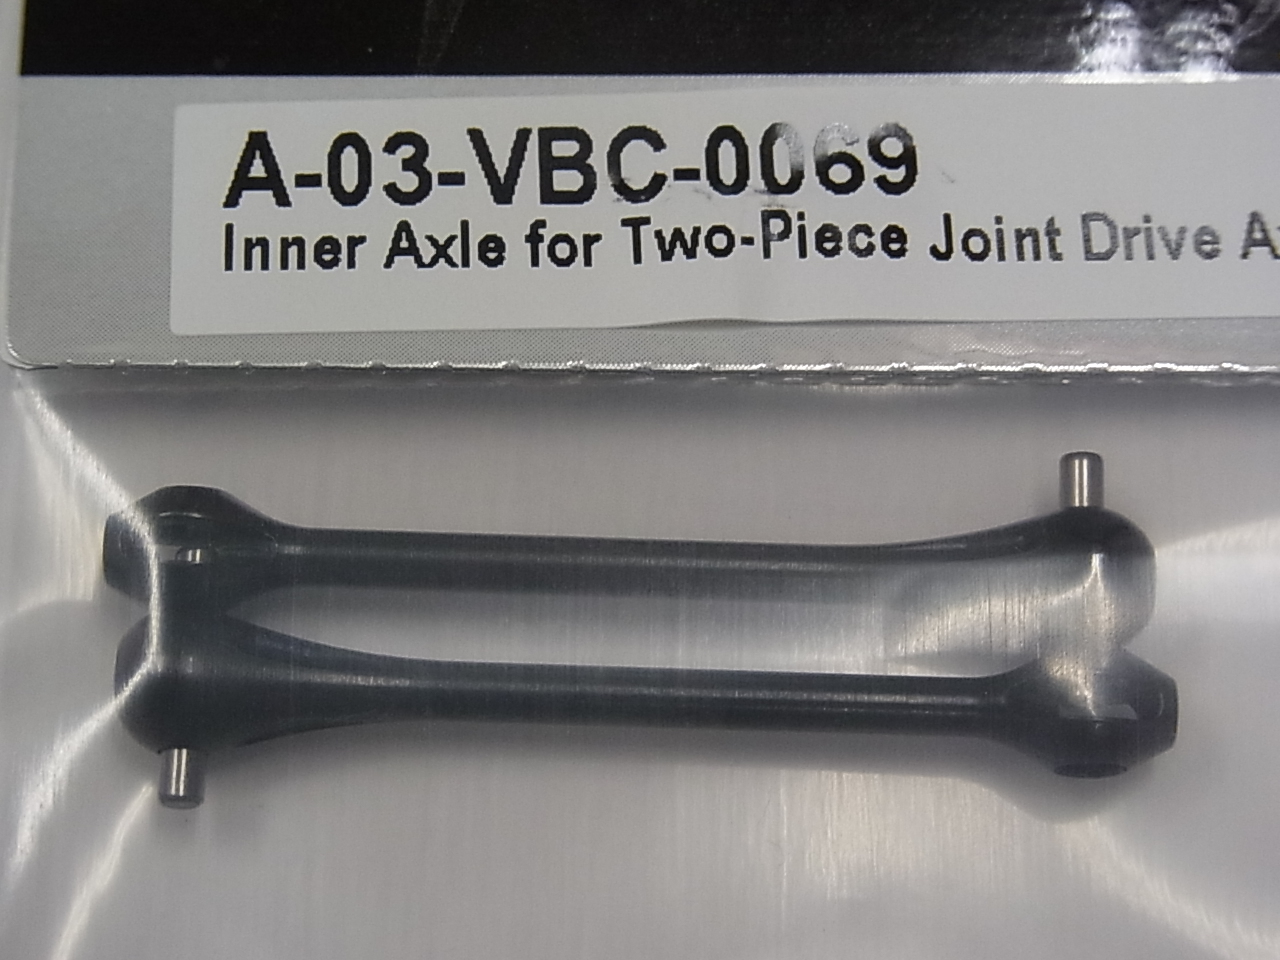  Inner Axle for Two-Piece Joint Drive Axle